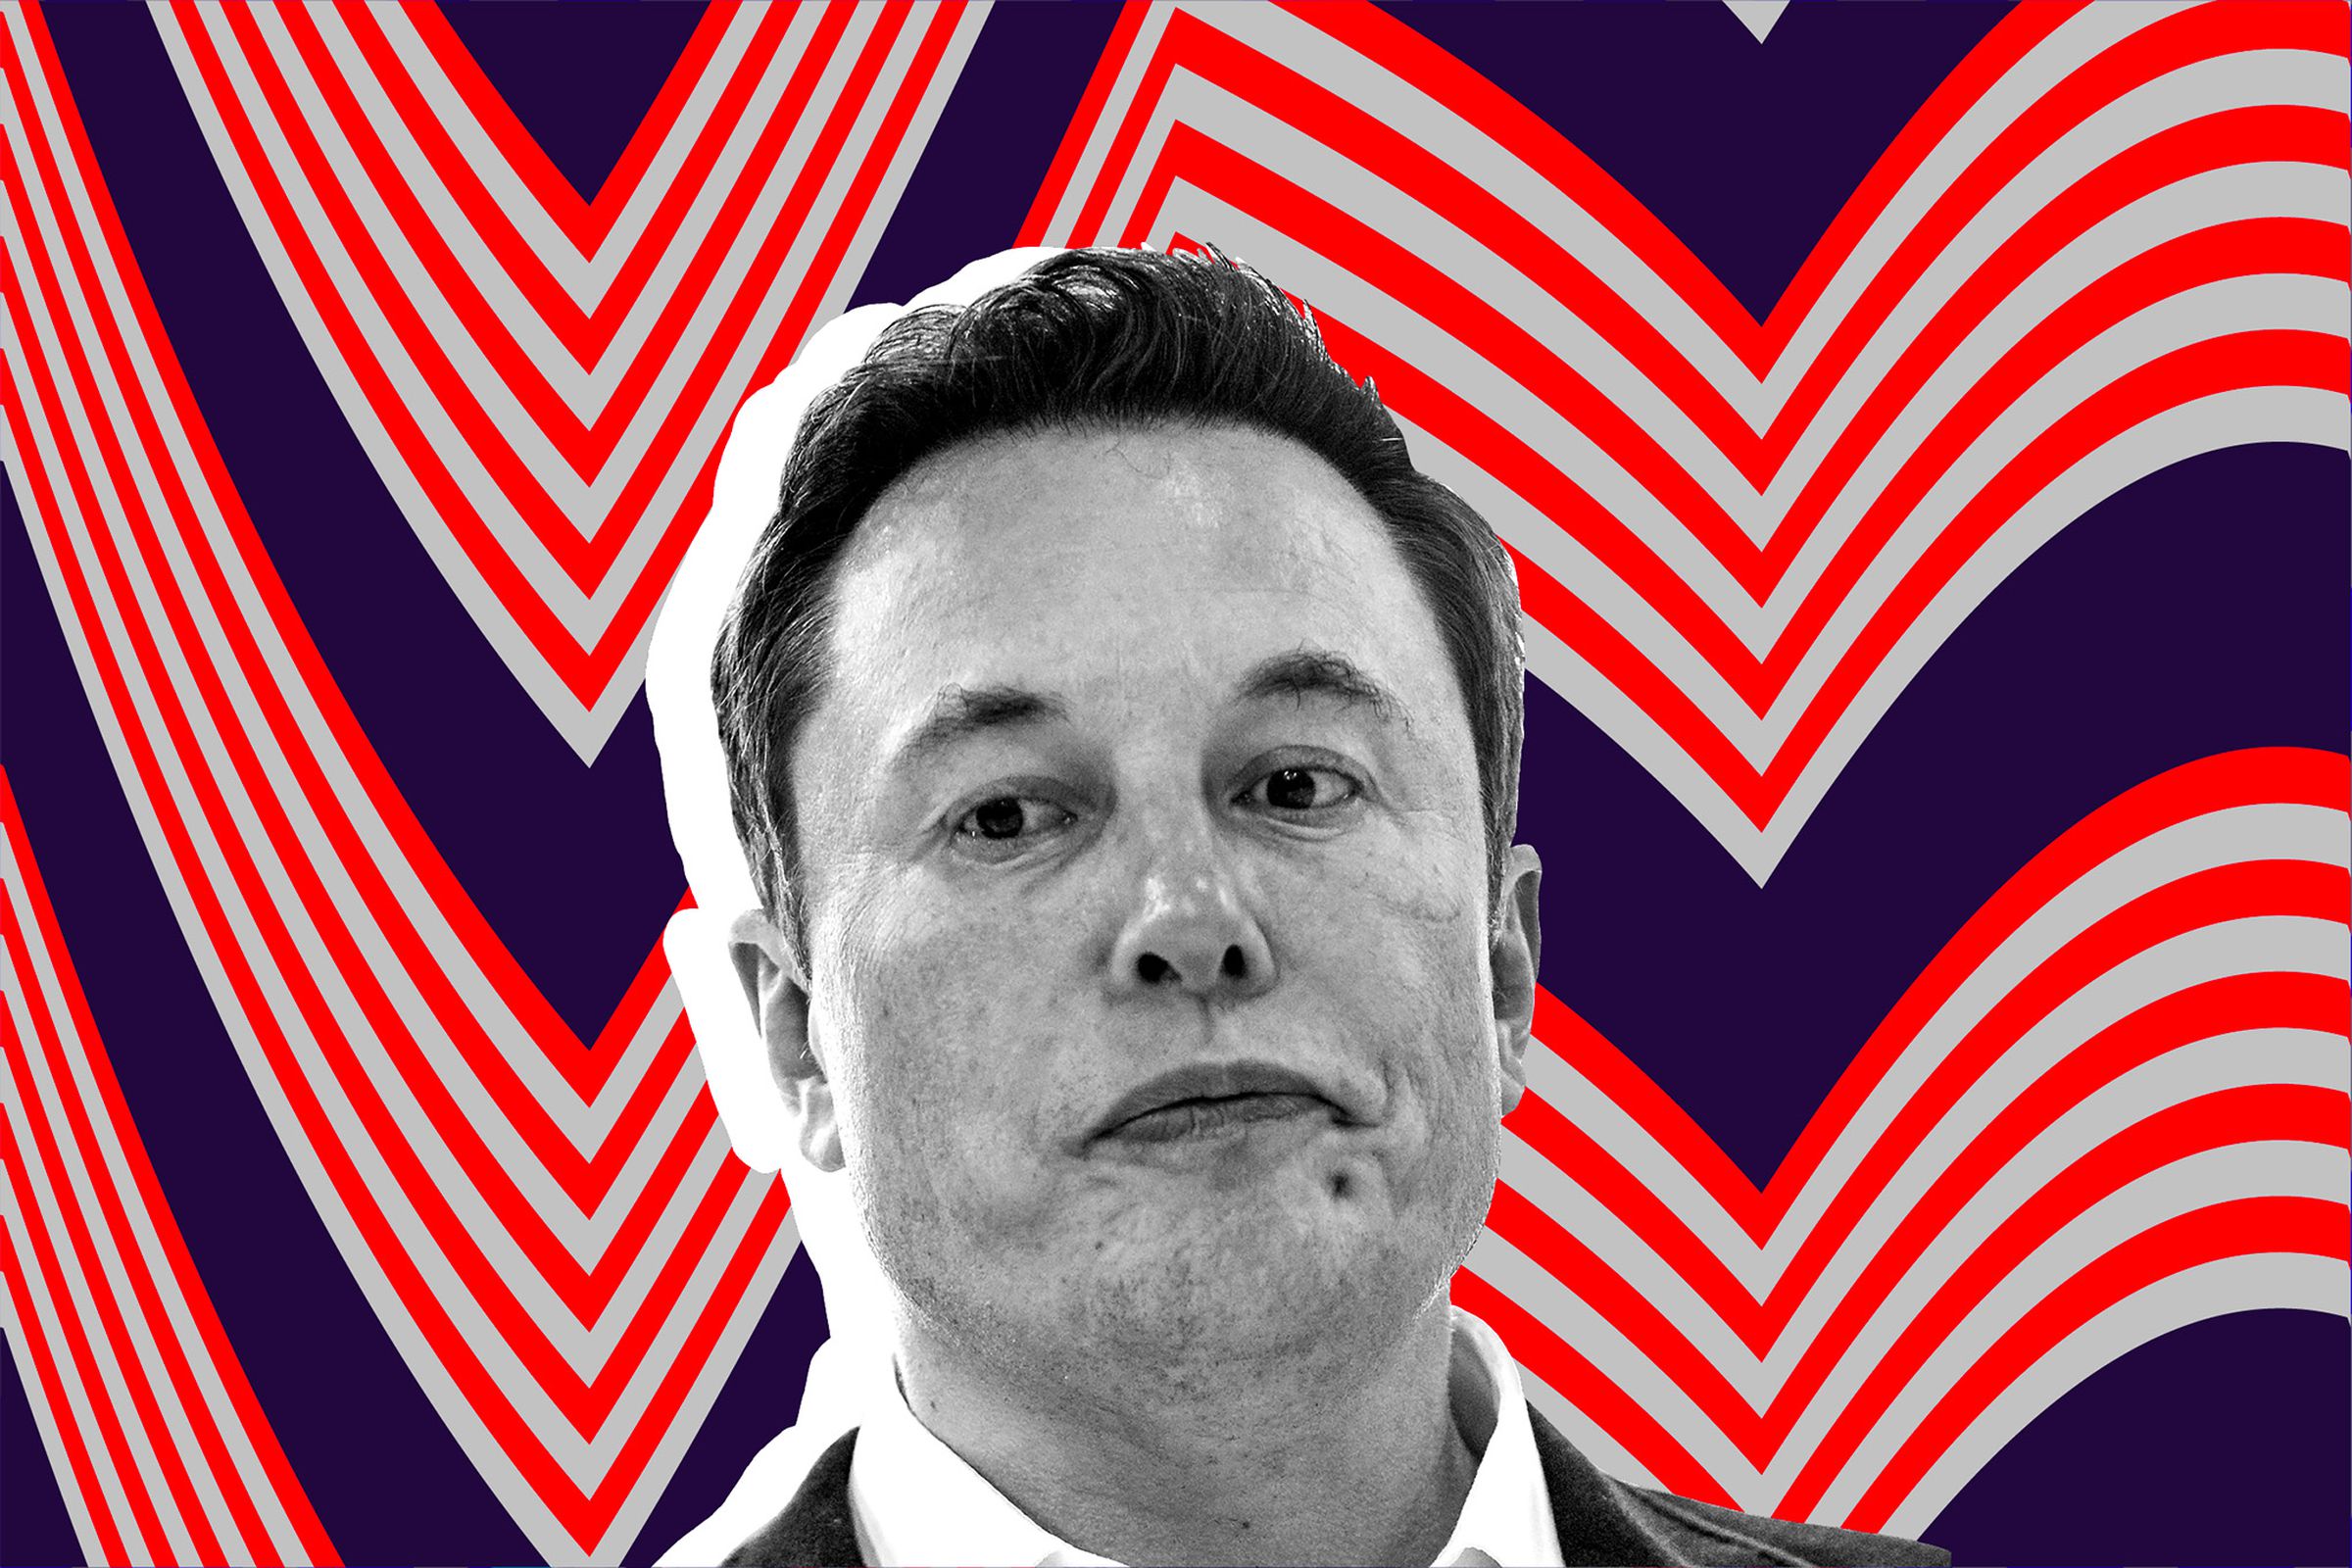 An image showing Elon Musk on a red striped background